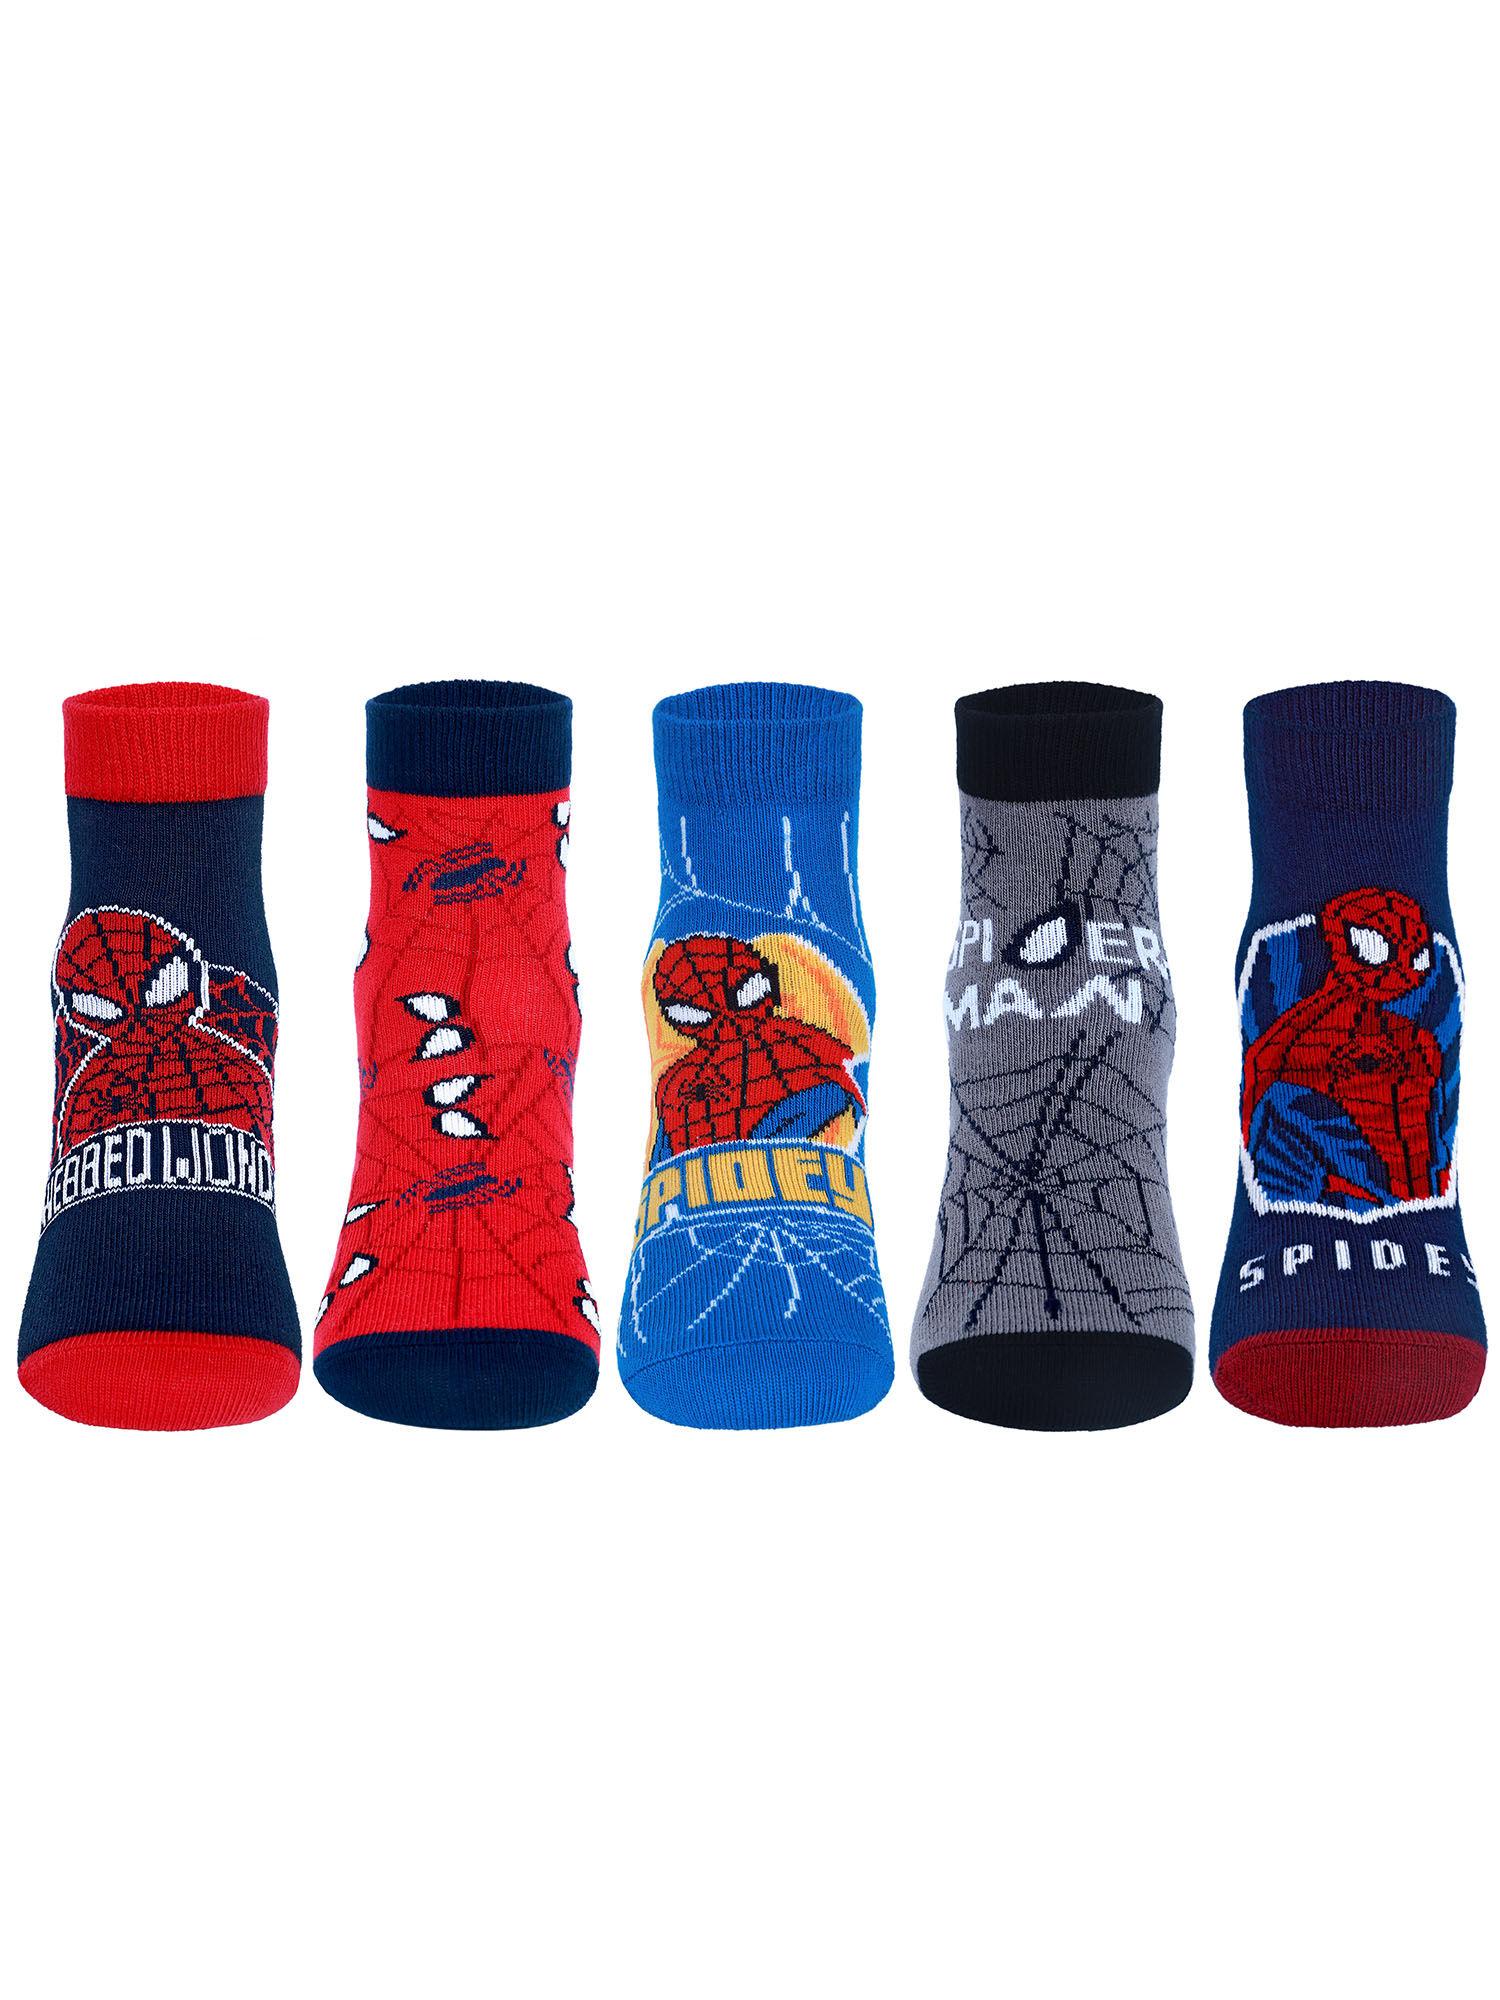 disney spiderman ankle length socks collection for kids (pack of 5)